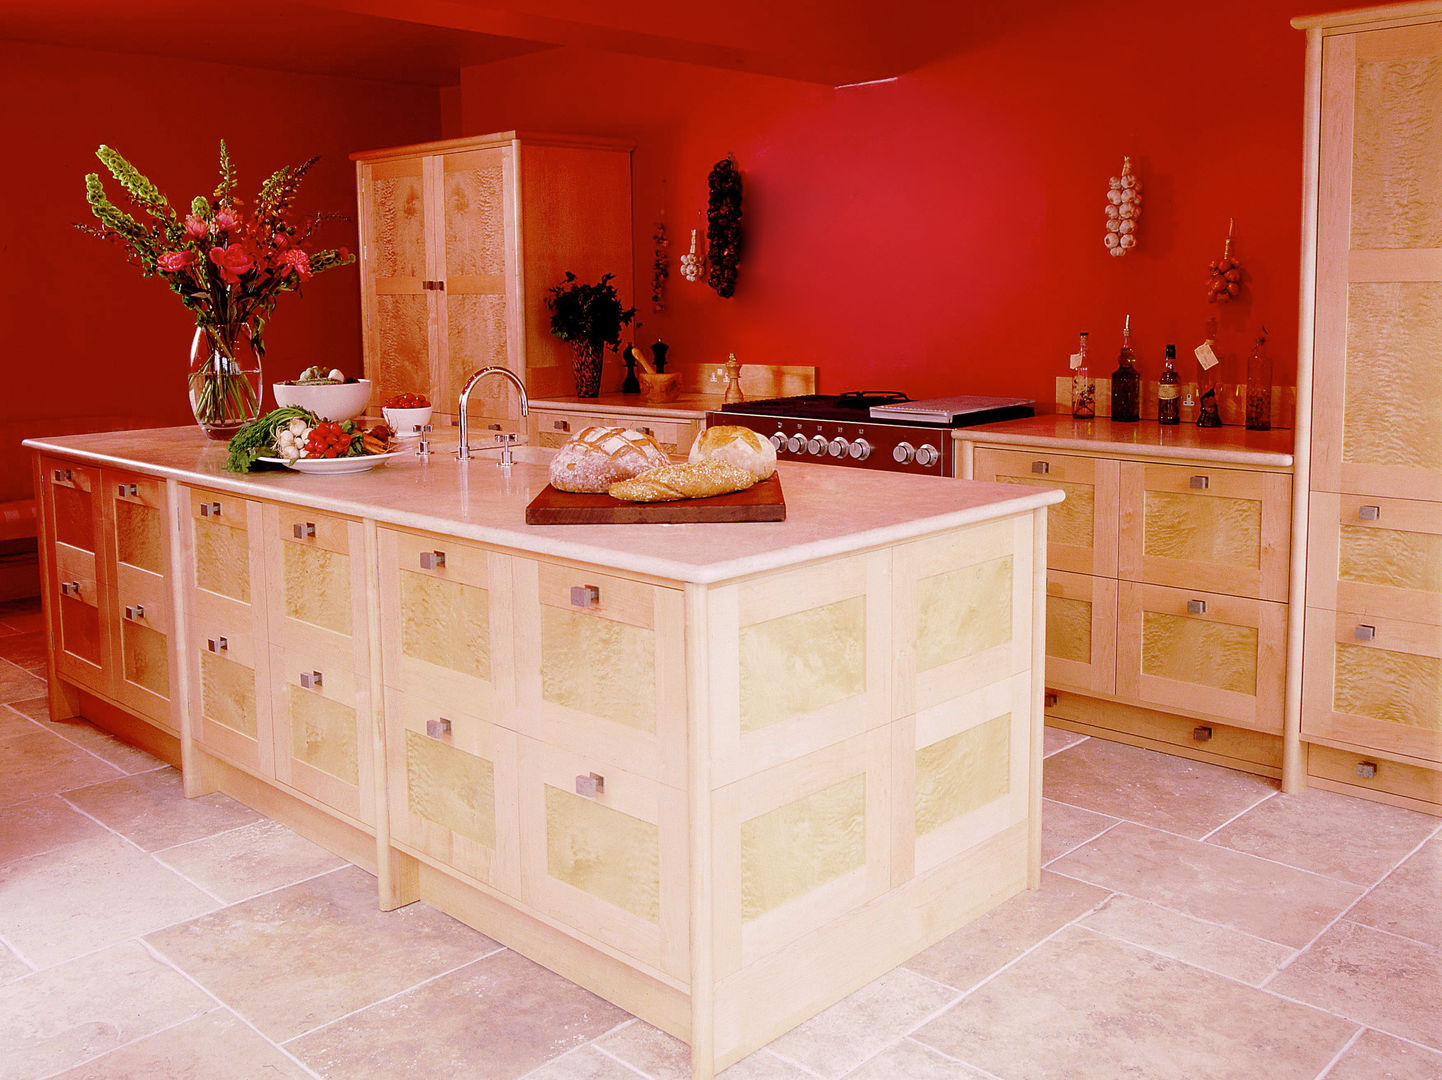 Quilted Maple Kitchen with Red Wall designed and made by Tim Wood Tim Wood Limited Cocinas modernas Armarios y estanterías